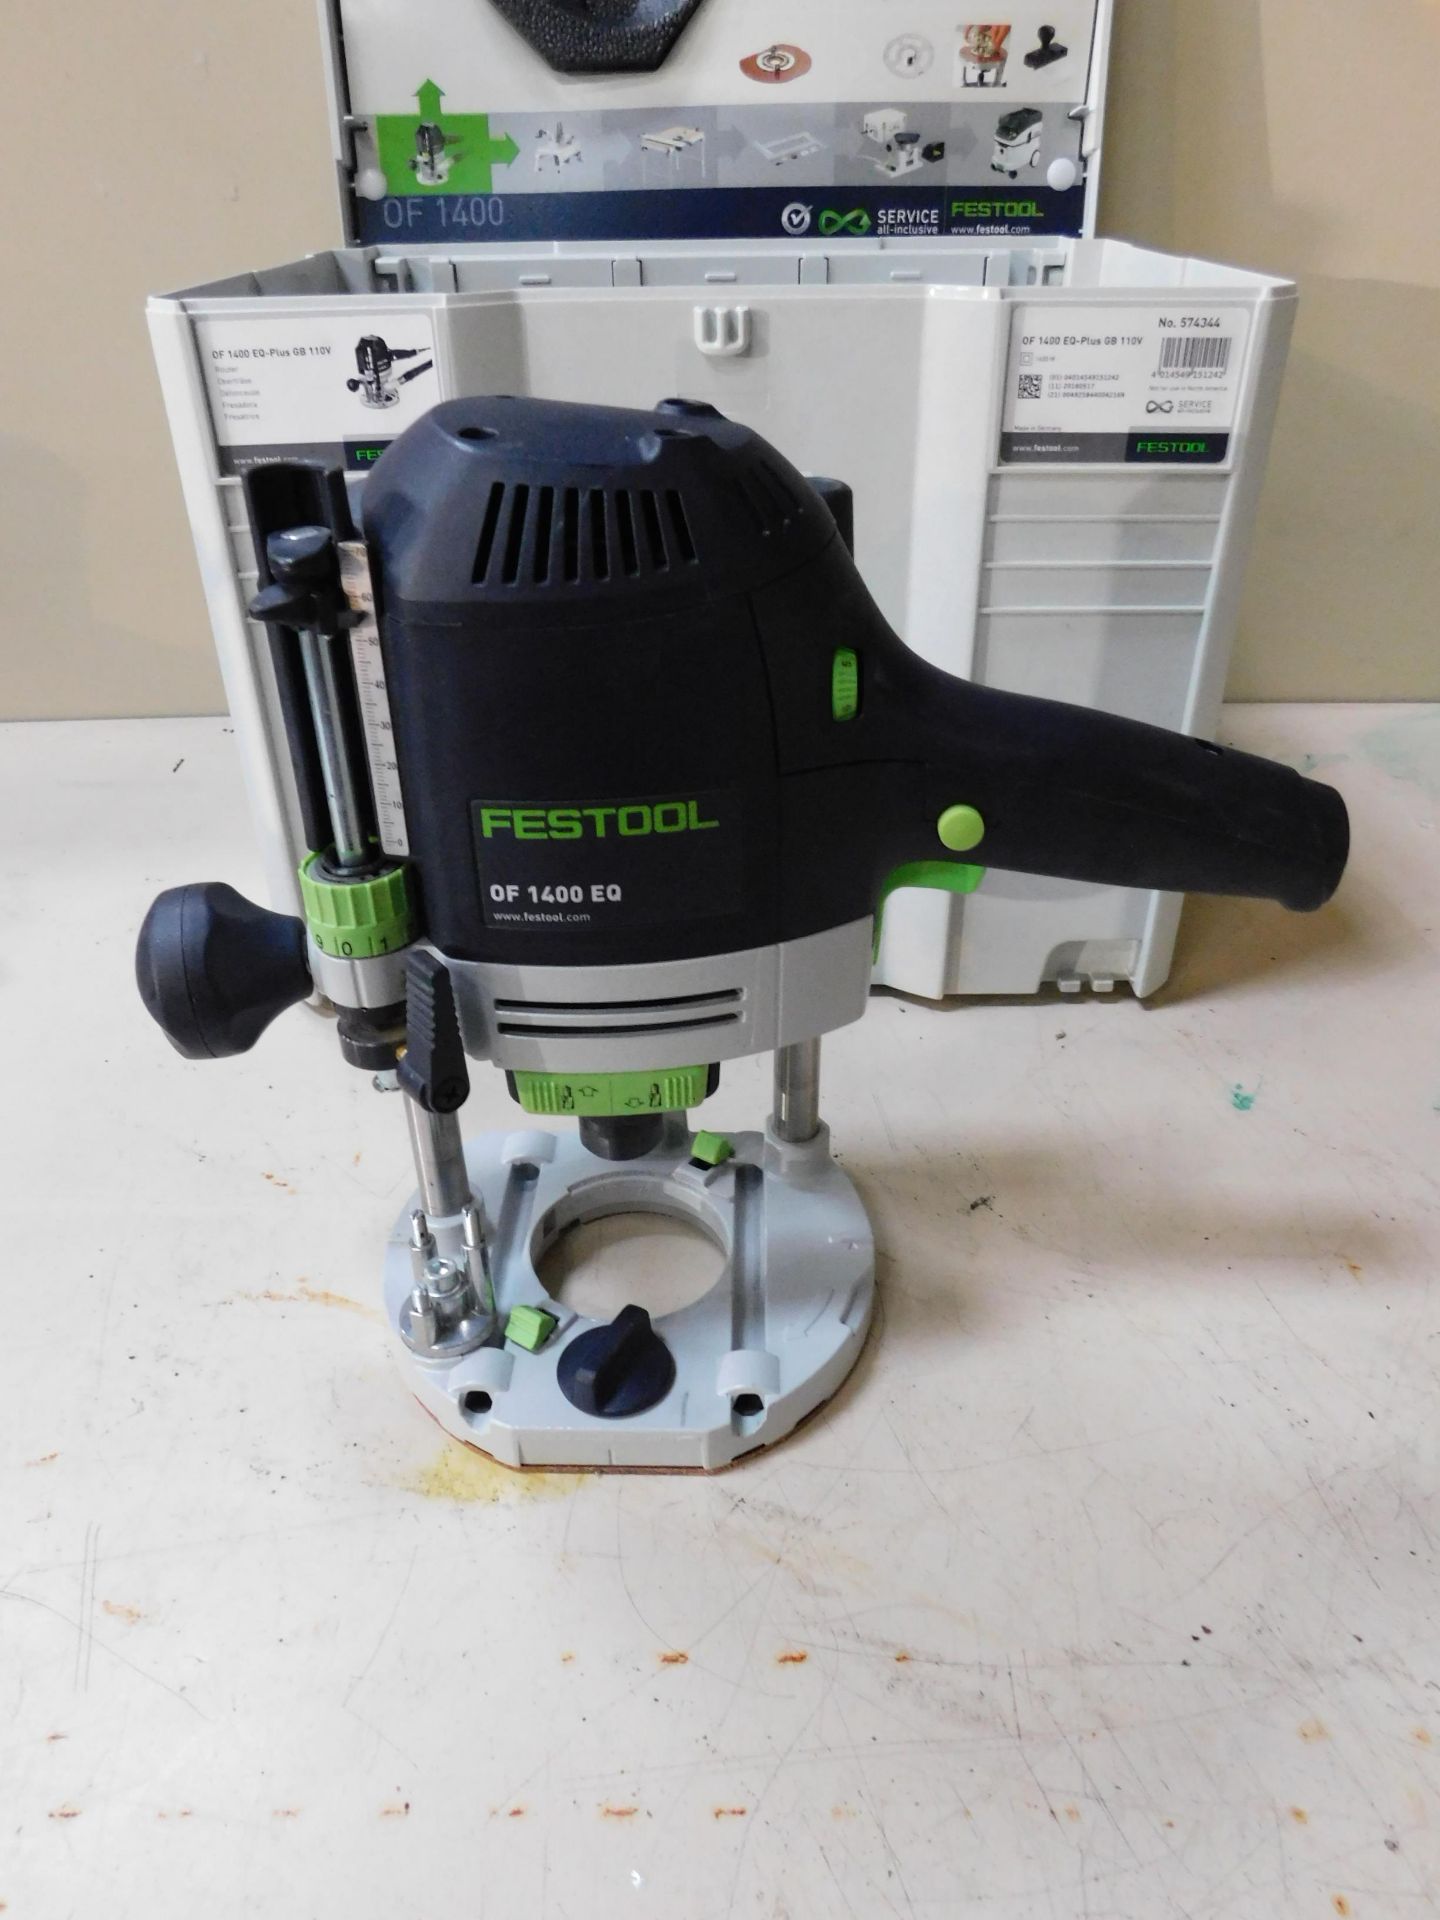 Festool OF1400 EQ Plus GB Router, 110v with Guide & Power Lead - Image 2 of 3